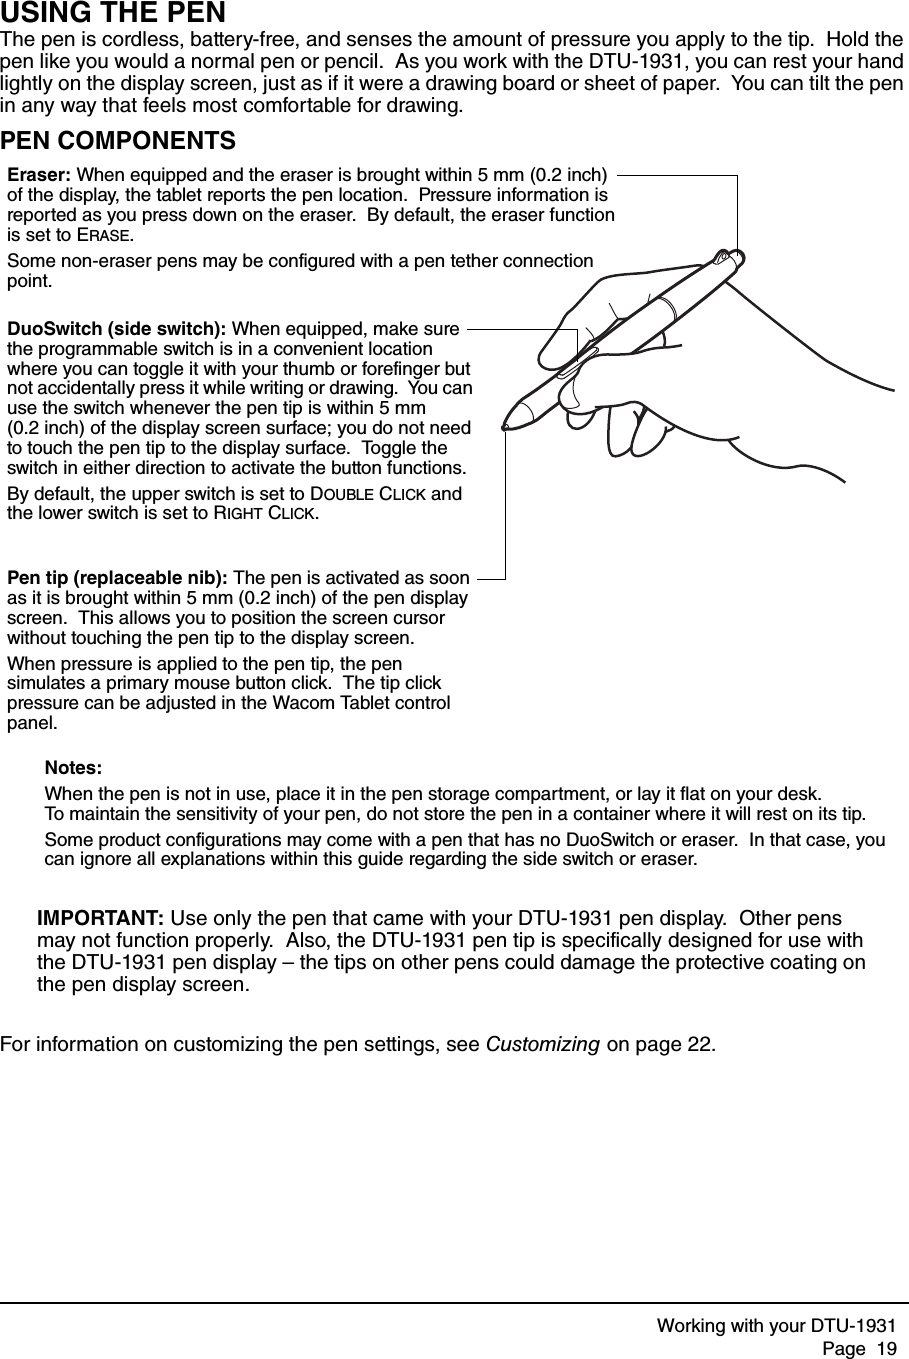 Working with your DTU-1931Page  19USING THE PENThe pen is cordless, battery-free, and senses the amount of pressure you apply to the tip.  Hold the pen like you would a normal pen or pencil.  As you work with the DTU-1931, you can rest your hand lightly on the display screen, just as if it were a drawing board or sheet of paper.  You can tilt the pen in any way that feels most comfortable for drawing.PEN COMPONENTSIMPORTANT: Use only the pen that came with your DTU-1931 pen display.  Other pens may not function properly.  Also, the DTU-1931 pen tip is specifically designed for use with the DTU-1931 pen display – the tips on other pens could damage the protective coating on the pen display screen.For information on customizing the pen settings, see Customizing on page 22.Eraser: When equipped and the eraser is brought within 5 mm (0.2 inch) of the display, the tablet reports the pen location.  Pressure information is reported as you press down on the eraser.  By default, the eraser function is set to ERASE.Some non-eraser pens may be configured with a pen tether connection point.DuoSwitch (side switch): When equipped, make sure the programmable switch is in a convenient location where you can toggle it with your thumb or forefinger but not accidentally press it while writing or drawing.  You can use the switch whenever the pen tip is within 5 mm (0.2 inch) of the display screen surface; you do not need to touch the pen tip to the display surface.  Toggle the switch in either direction to activate the button functions.By default, the upper switch is set to DOUBLE CLICK and the lower switch is set to RIGHT CLICK.Pen tip (replaceable nib): The pen is activated as soon as it is brought within 5 mm (0.2 inch) of the pen display screen.  This allows you to position the screen cursor without touching the pen tip to the display screen.  When pressure is applied to the pen tip, the pen simulates a primary mouse button click.  The tip click pressure can be adjusted in the Wacom Tablet control panel.Notes: When the pen is not in use, place it in the pen storage compartment, or lay it flat on your desk.  To maintain the sensitivity of your pen, do not store the pen in a container where it will rest on its tip.Some product configurations may come with a pen that has no DuoSwitch or eraser.  In that case, you can ignore all explanations within this guide regarding the side switch or eraser.